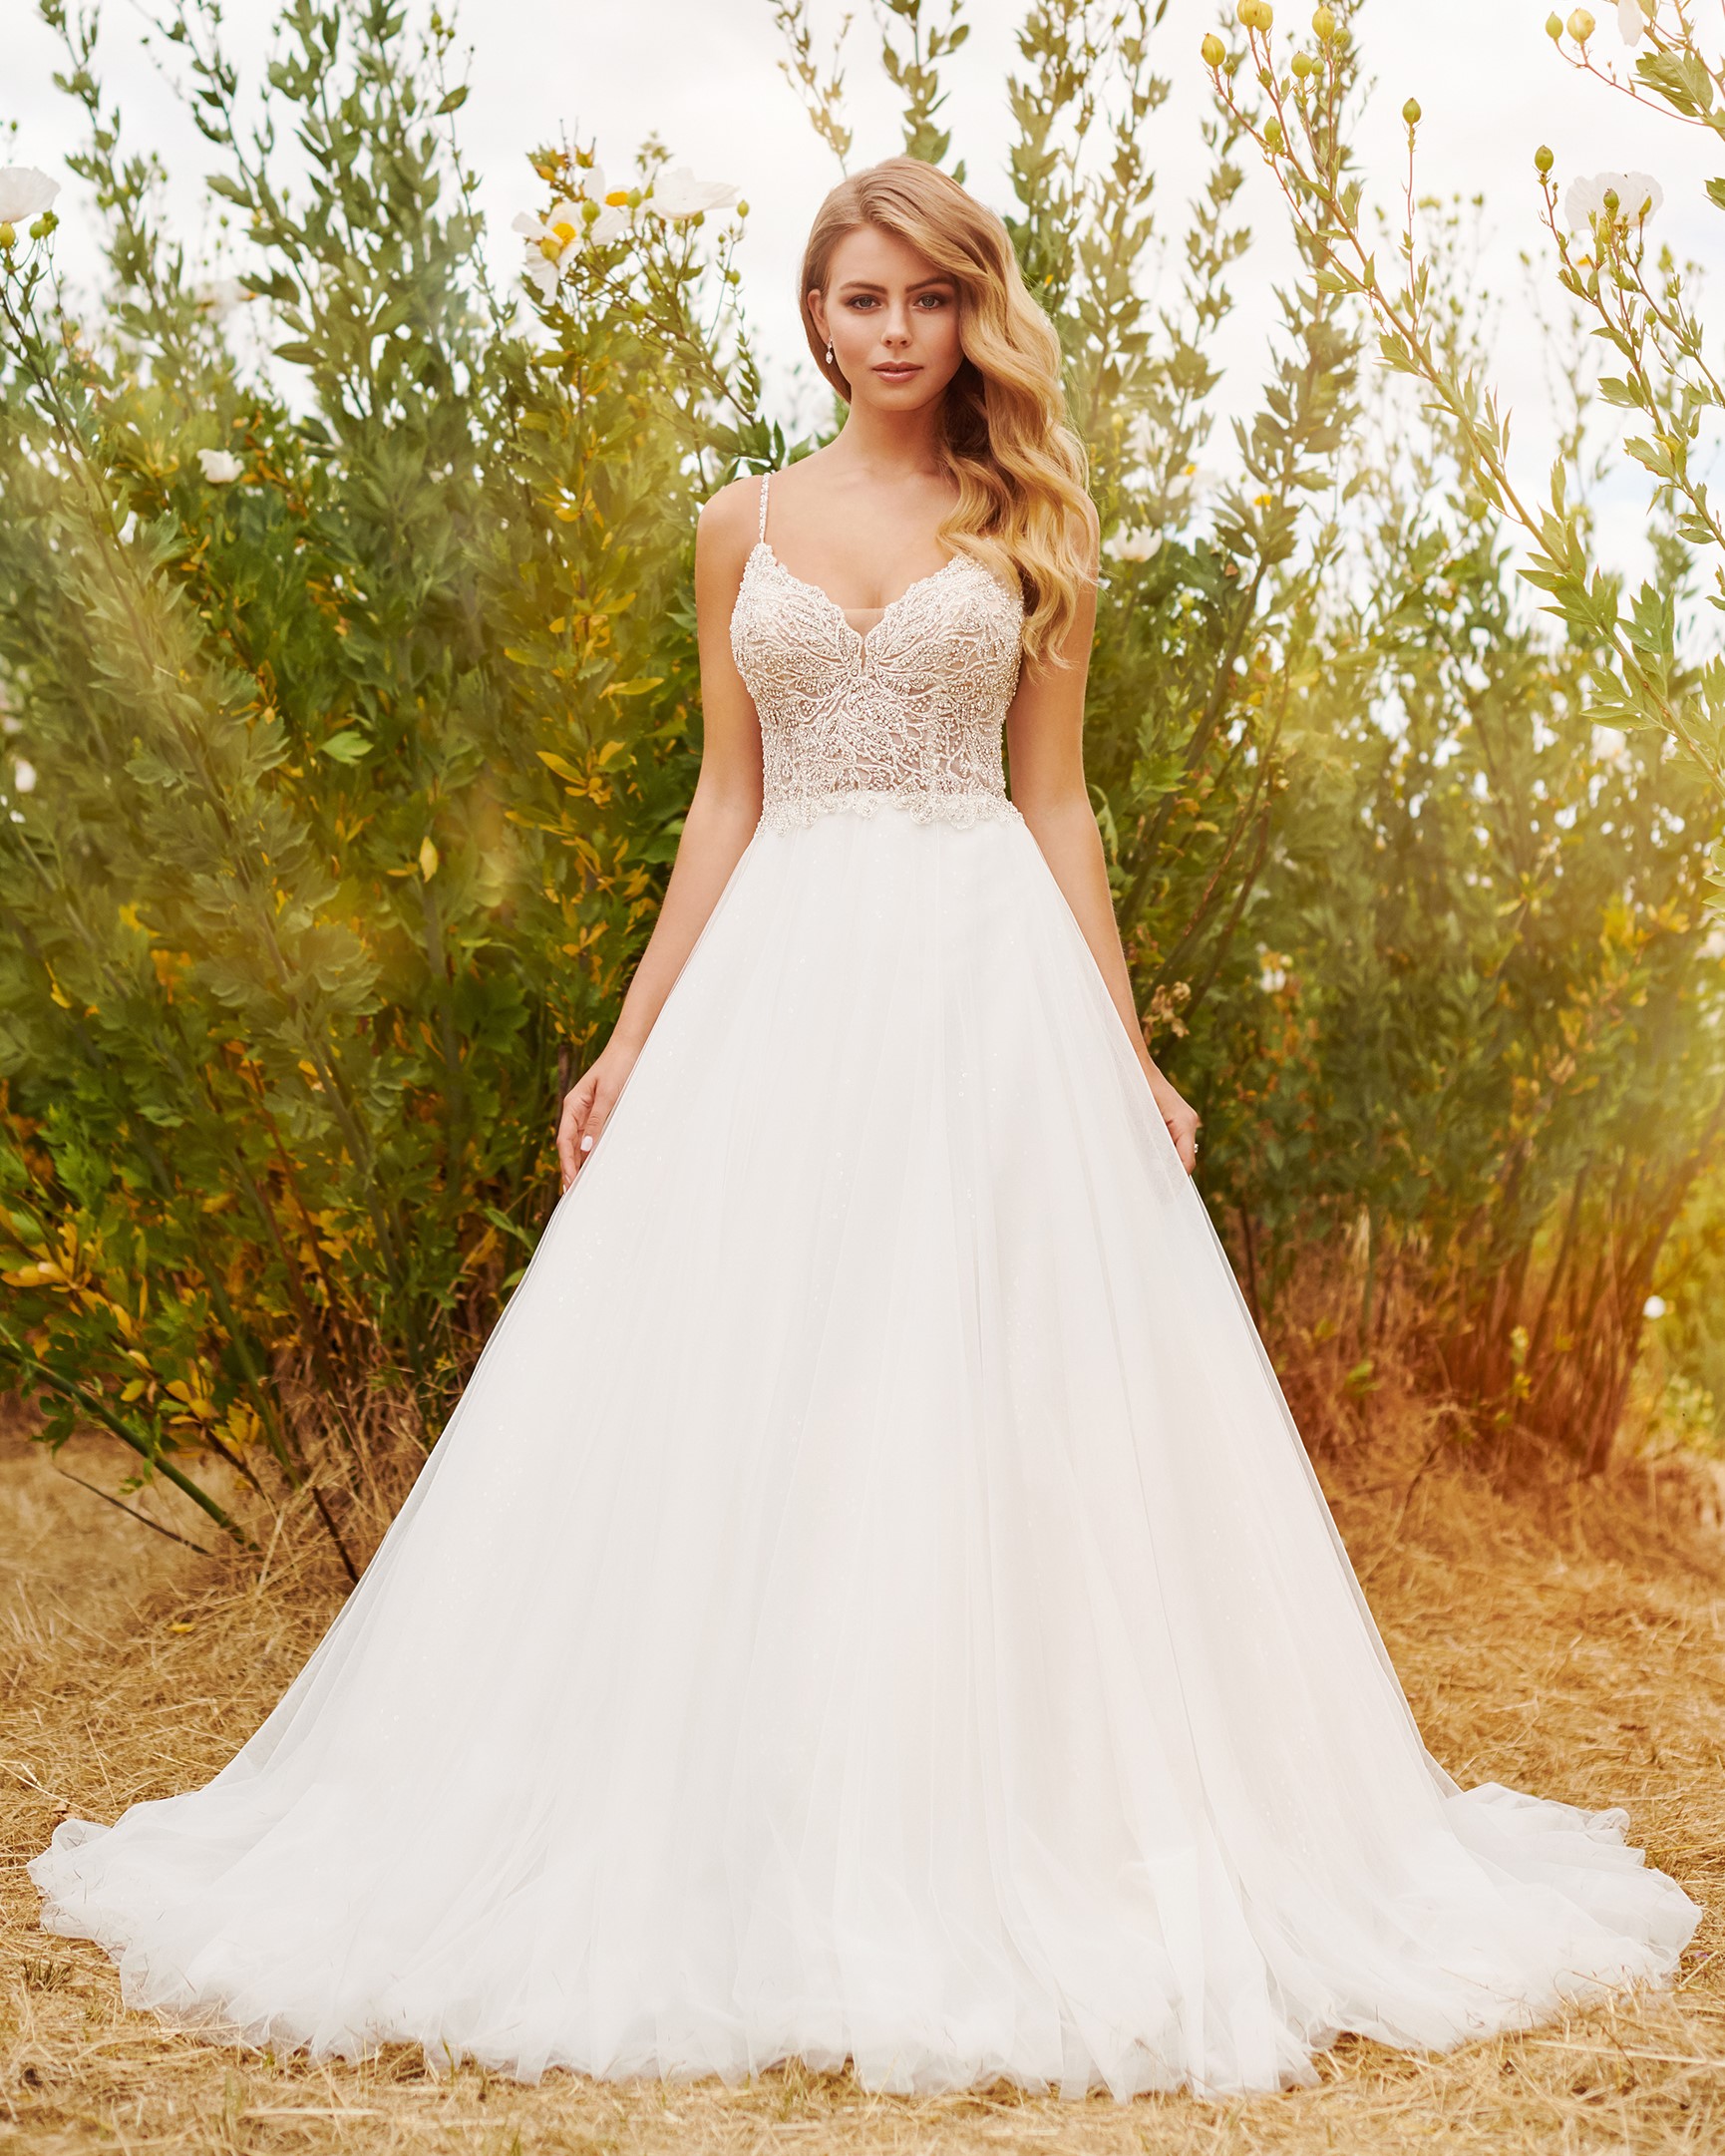 Bride wearing casual ball gown wedding dress